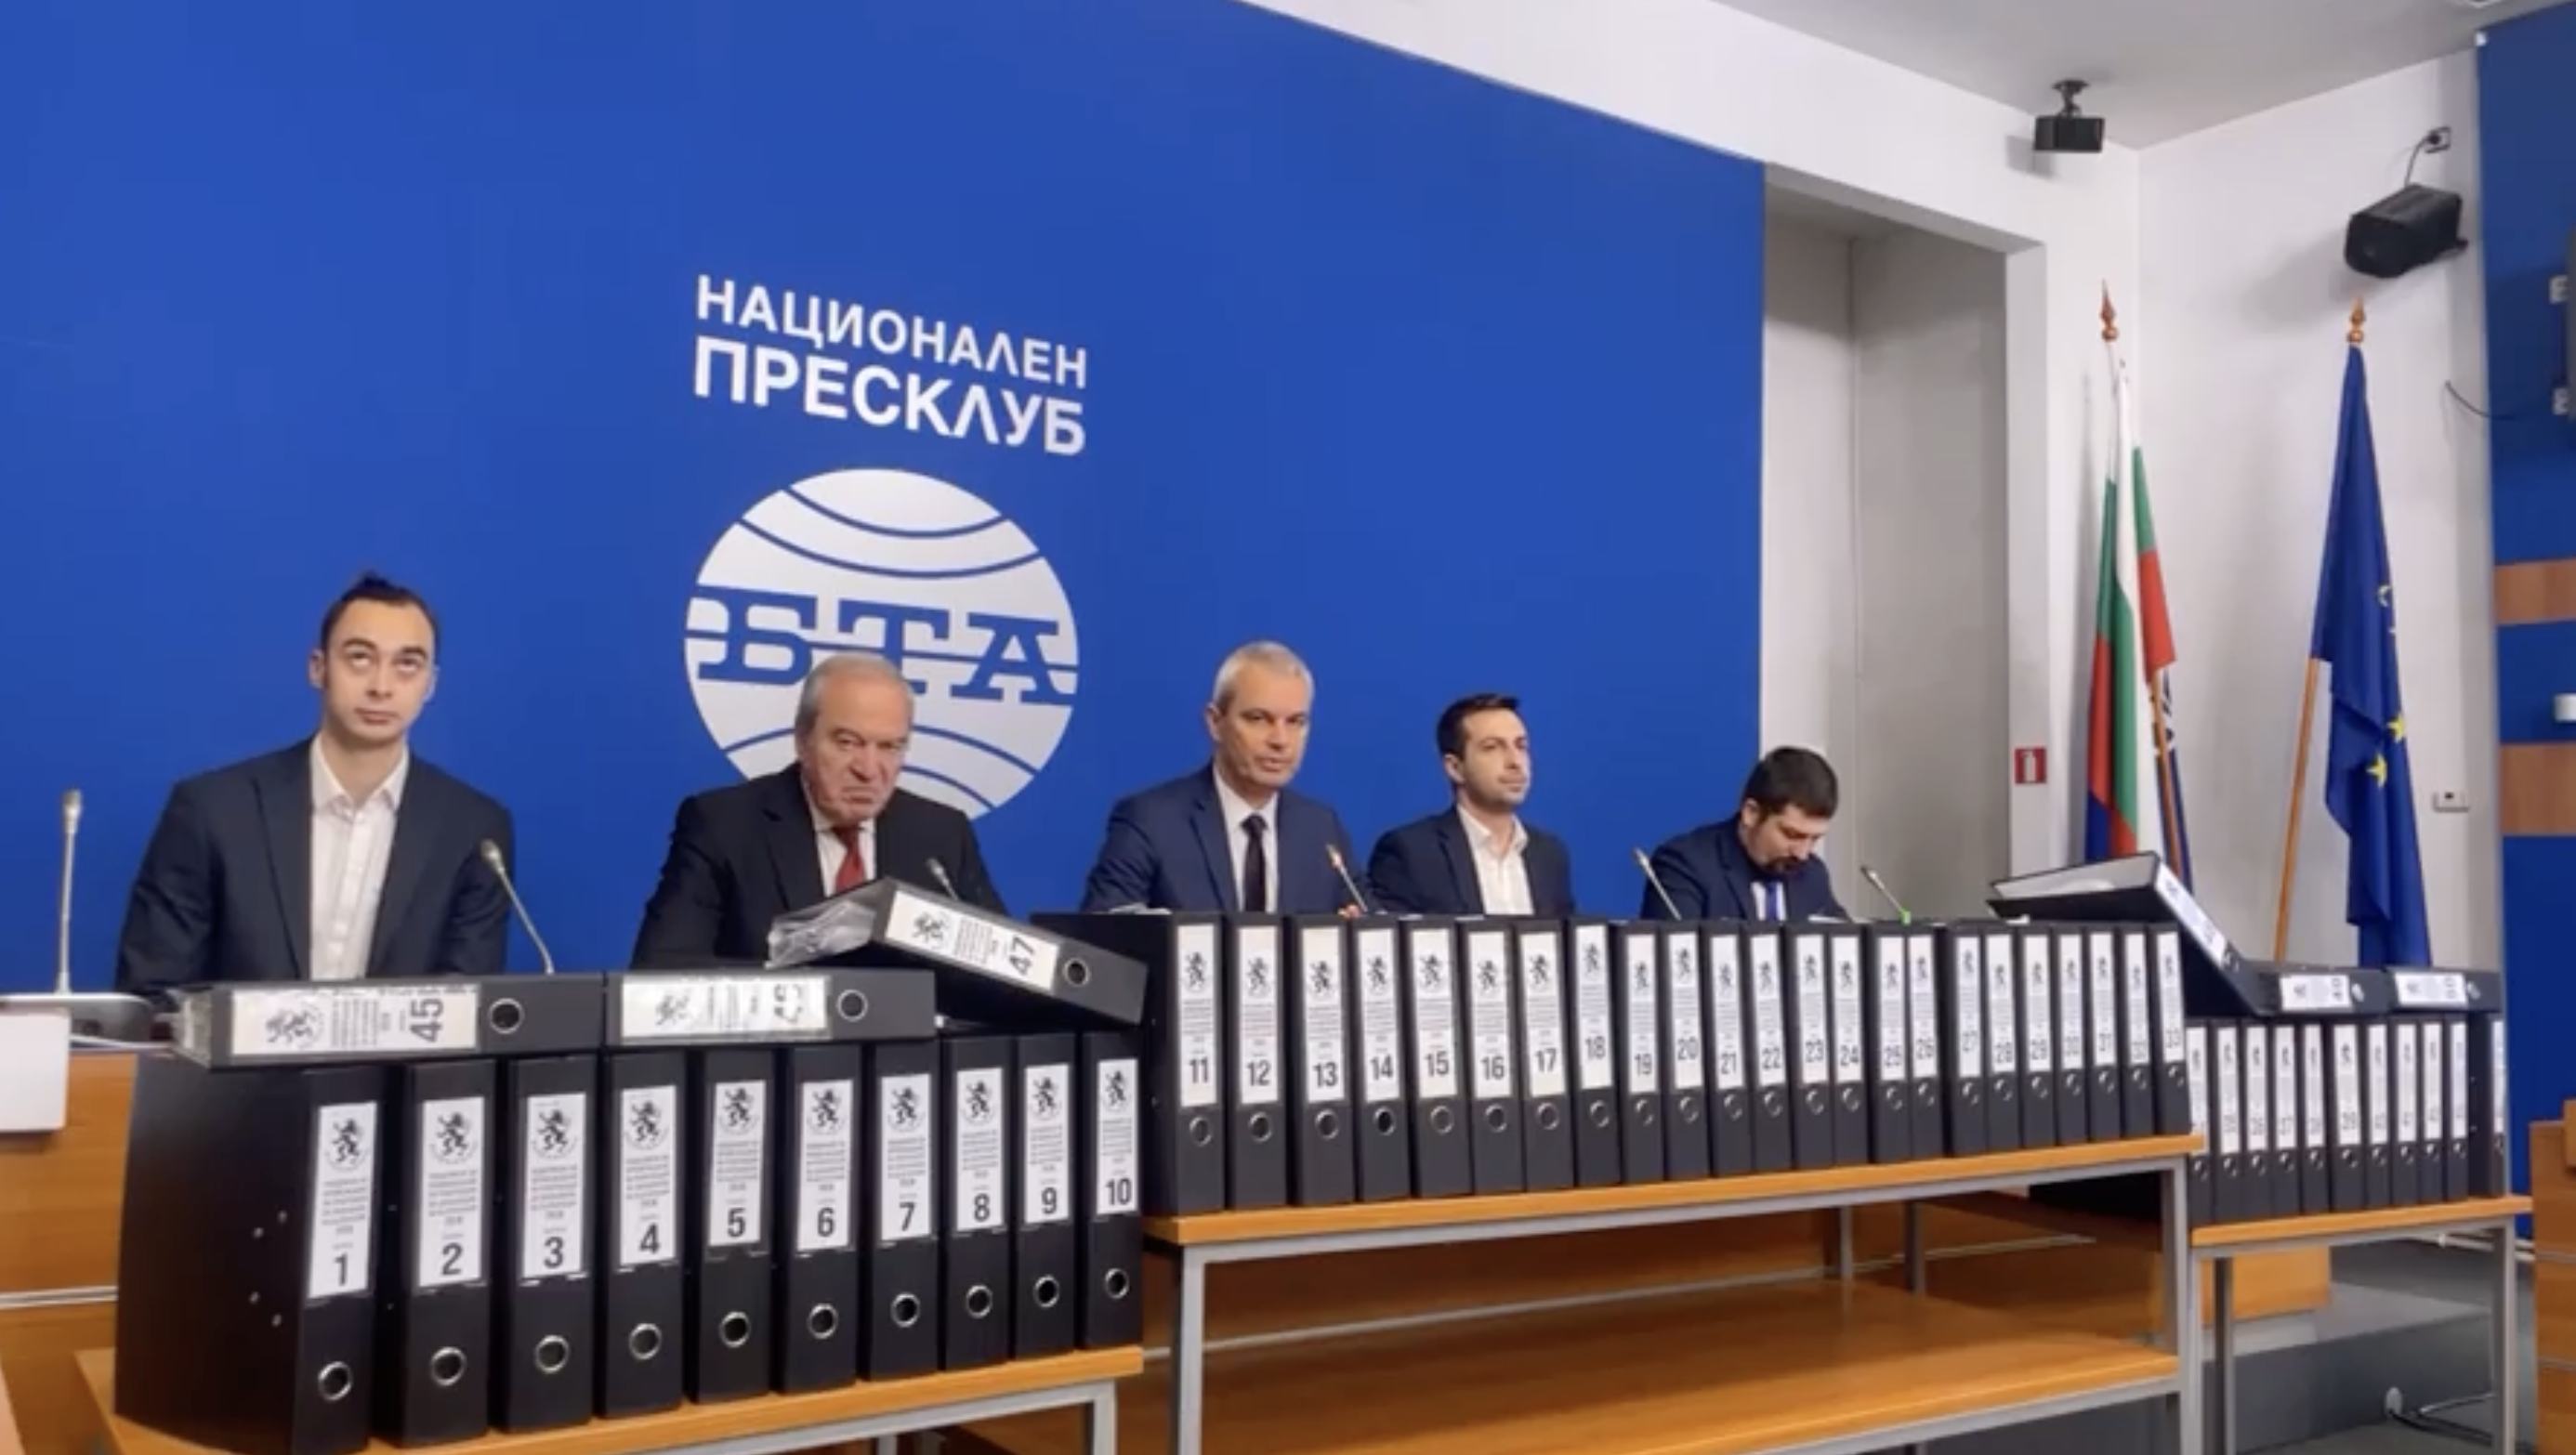 Vazrazhdane Party leaders announcing petition drive results